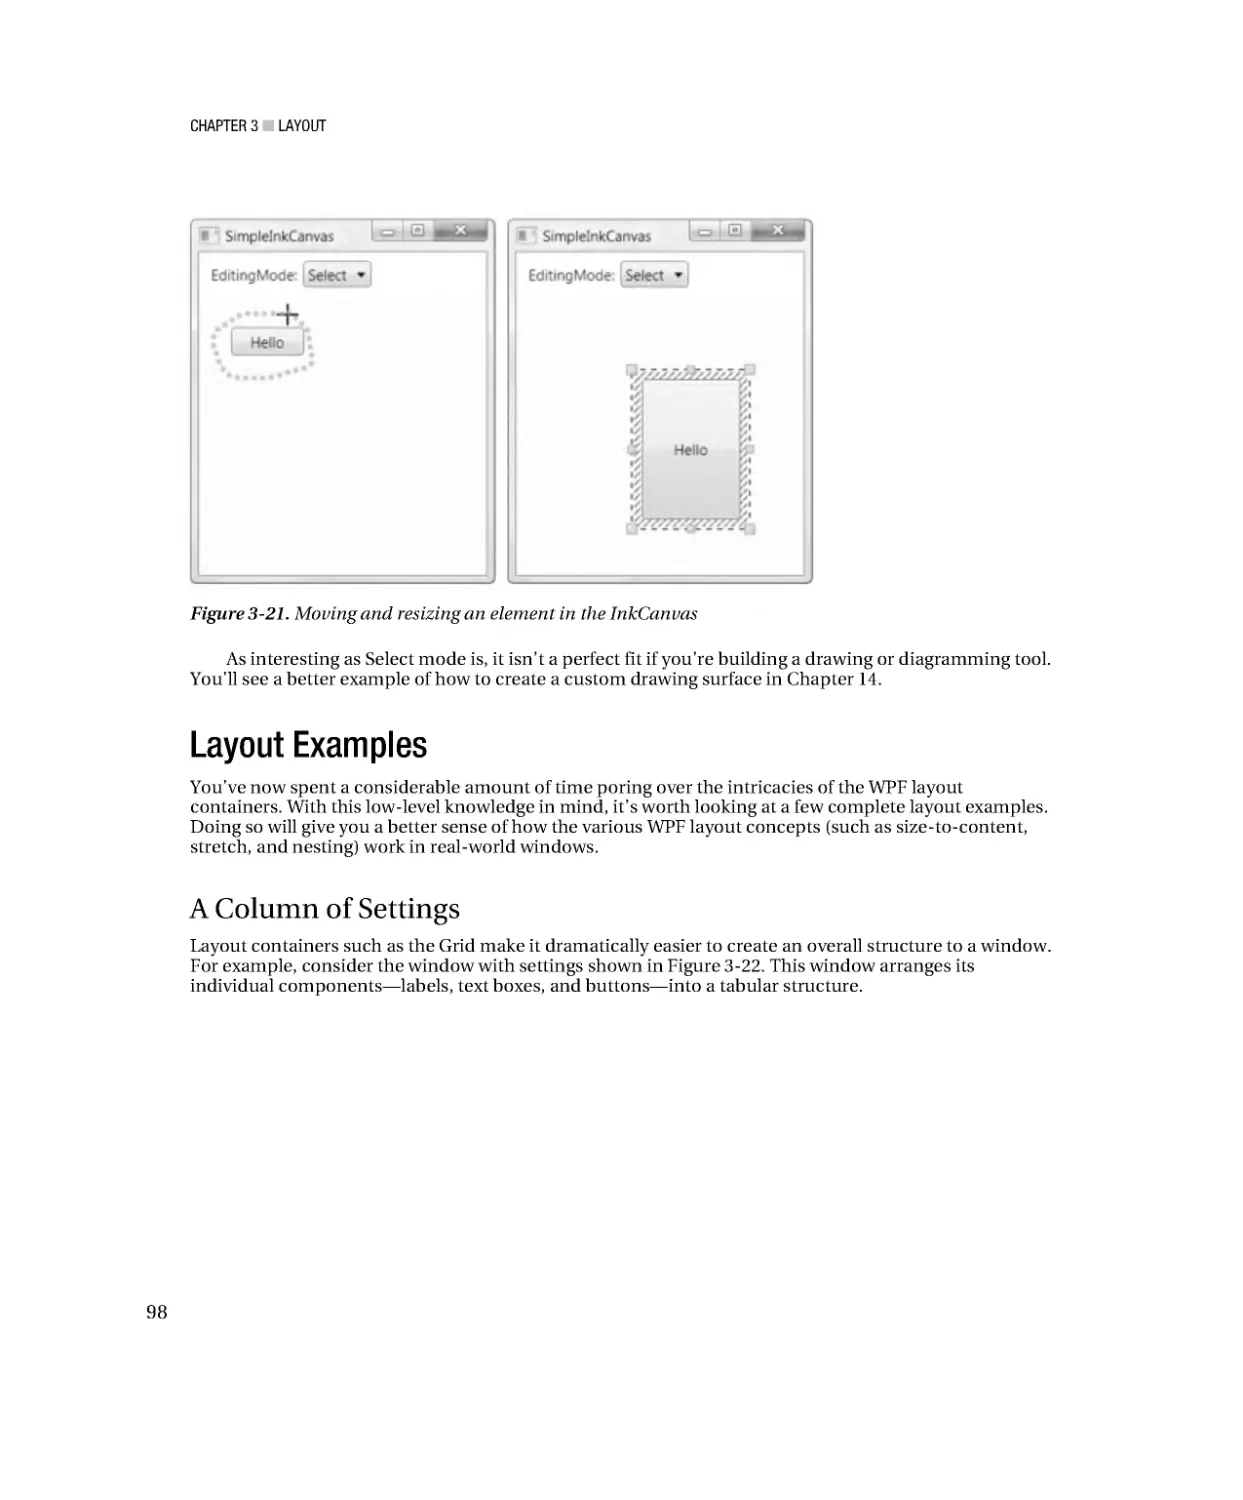 Layout Examples